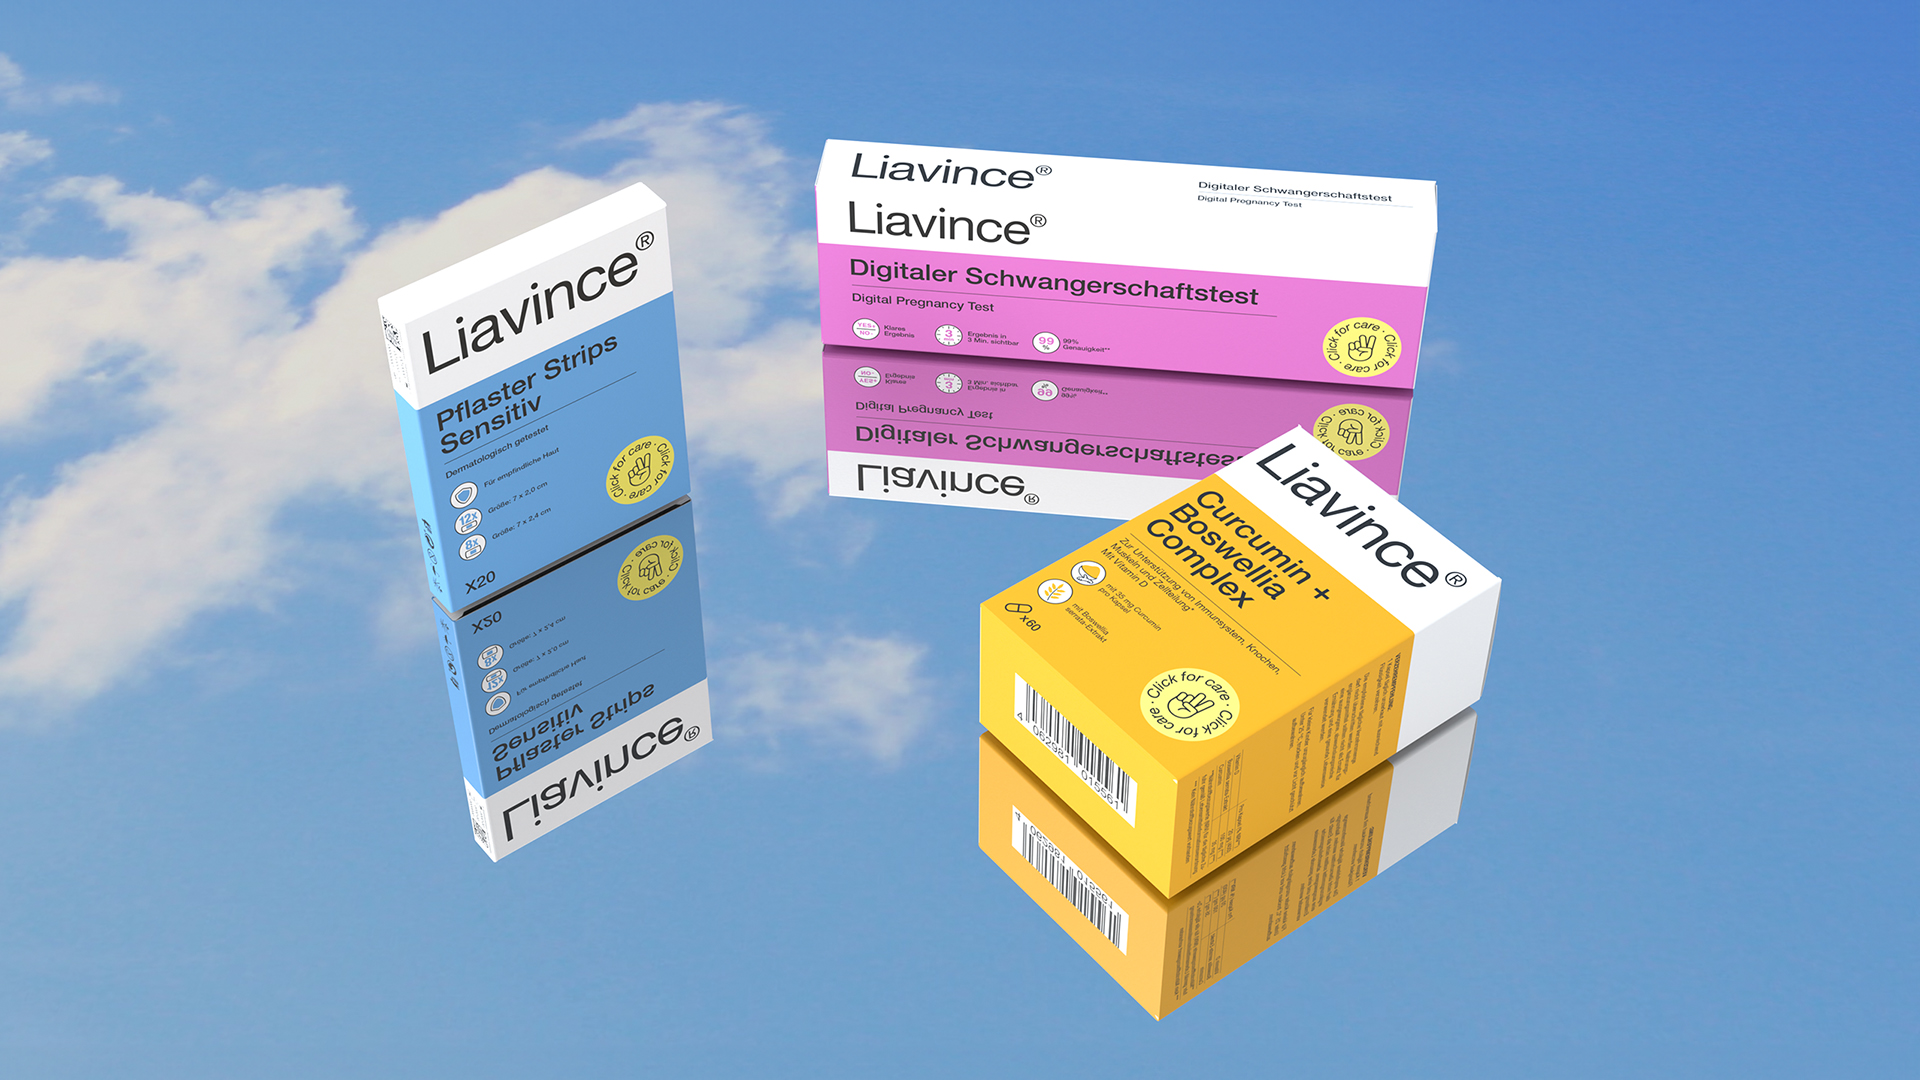 Liavince — Positive Vibes in Health Care